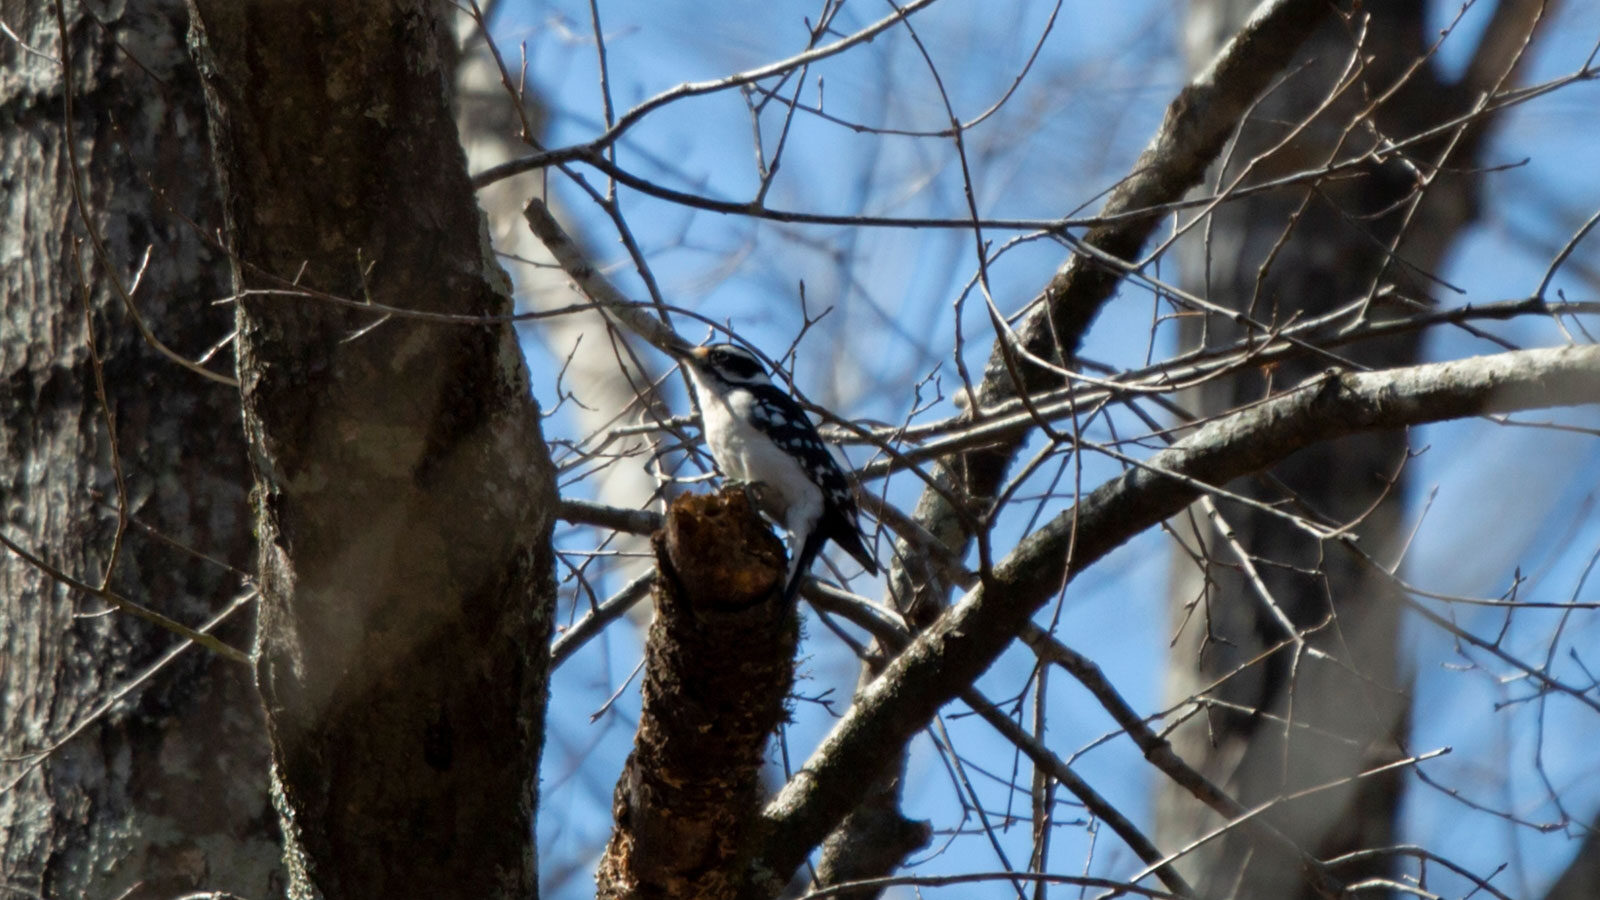 Female downy woodpecker perched on the top of a dying, broken tree branch